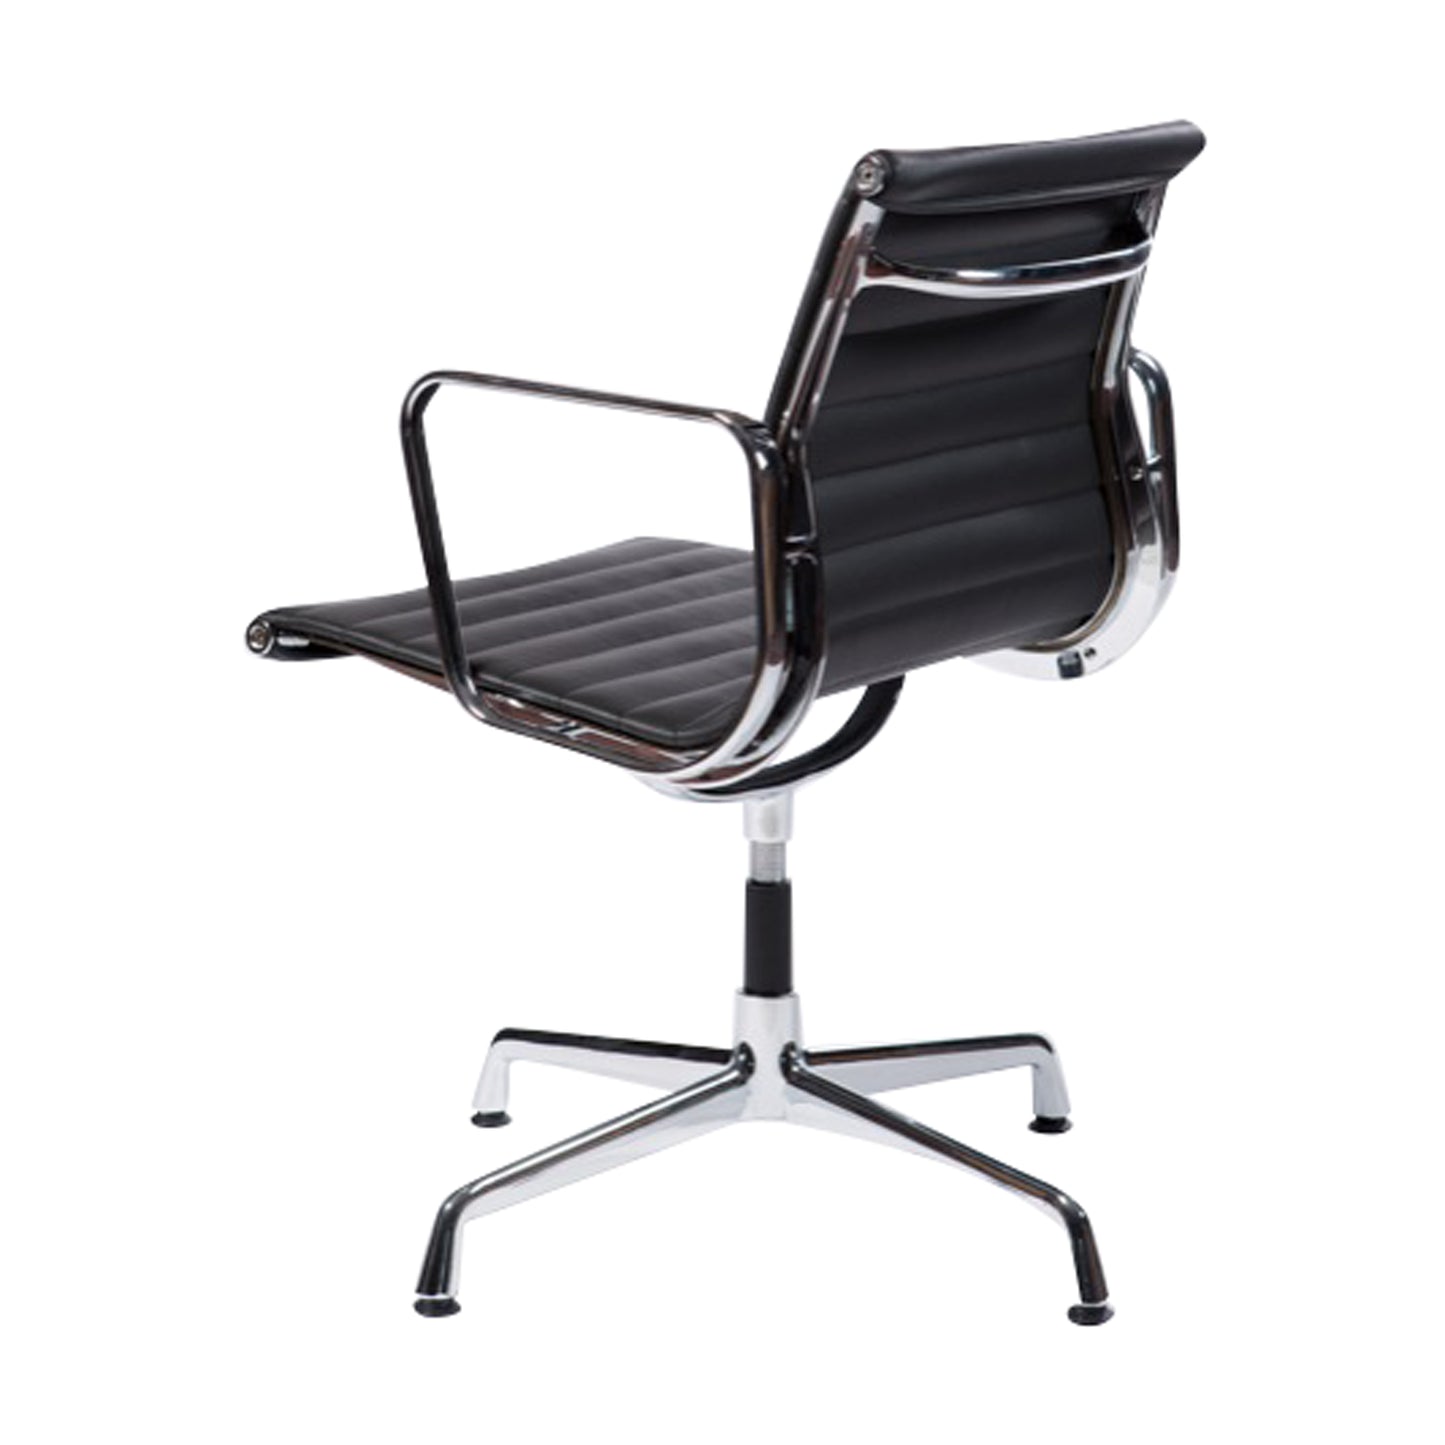 Chair without wheels aluminium style | Black Leather | Back